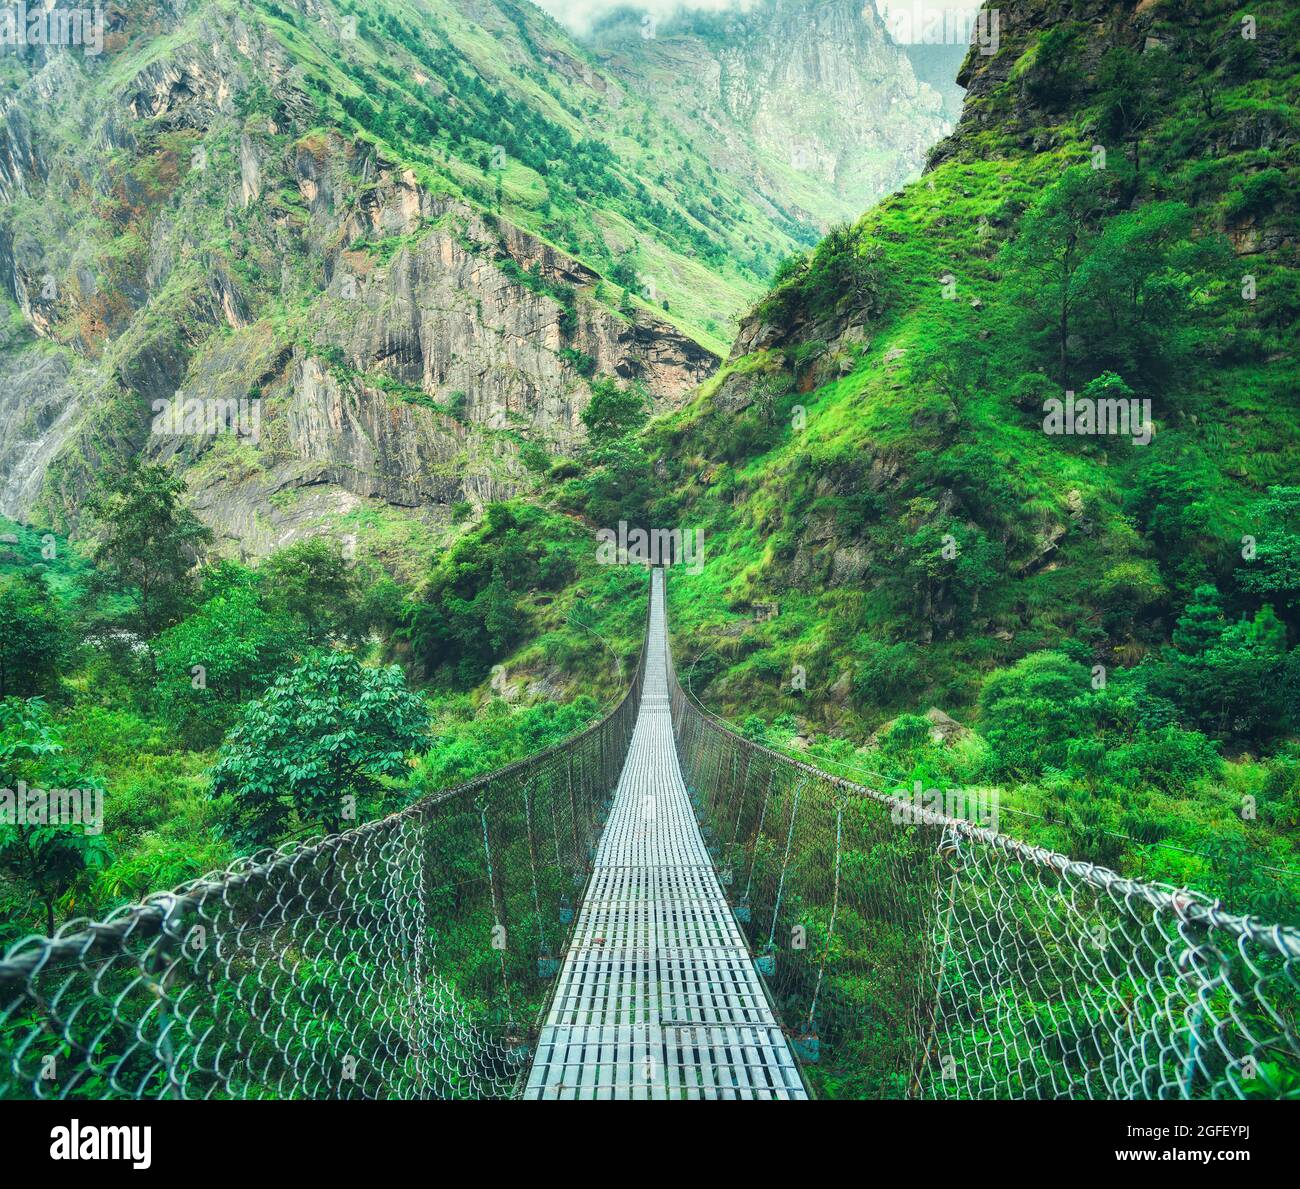 Suspension metal bridge and beautiful green forest in mountains Stock Photo